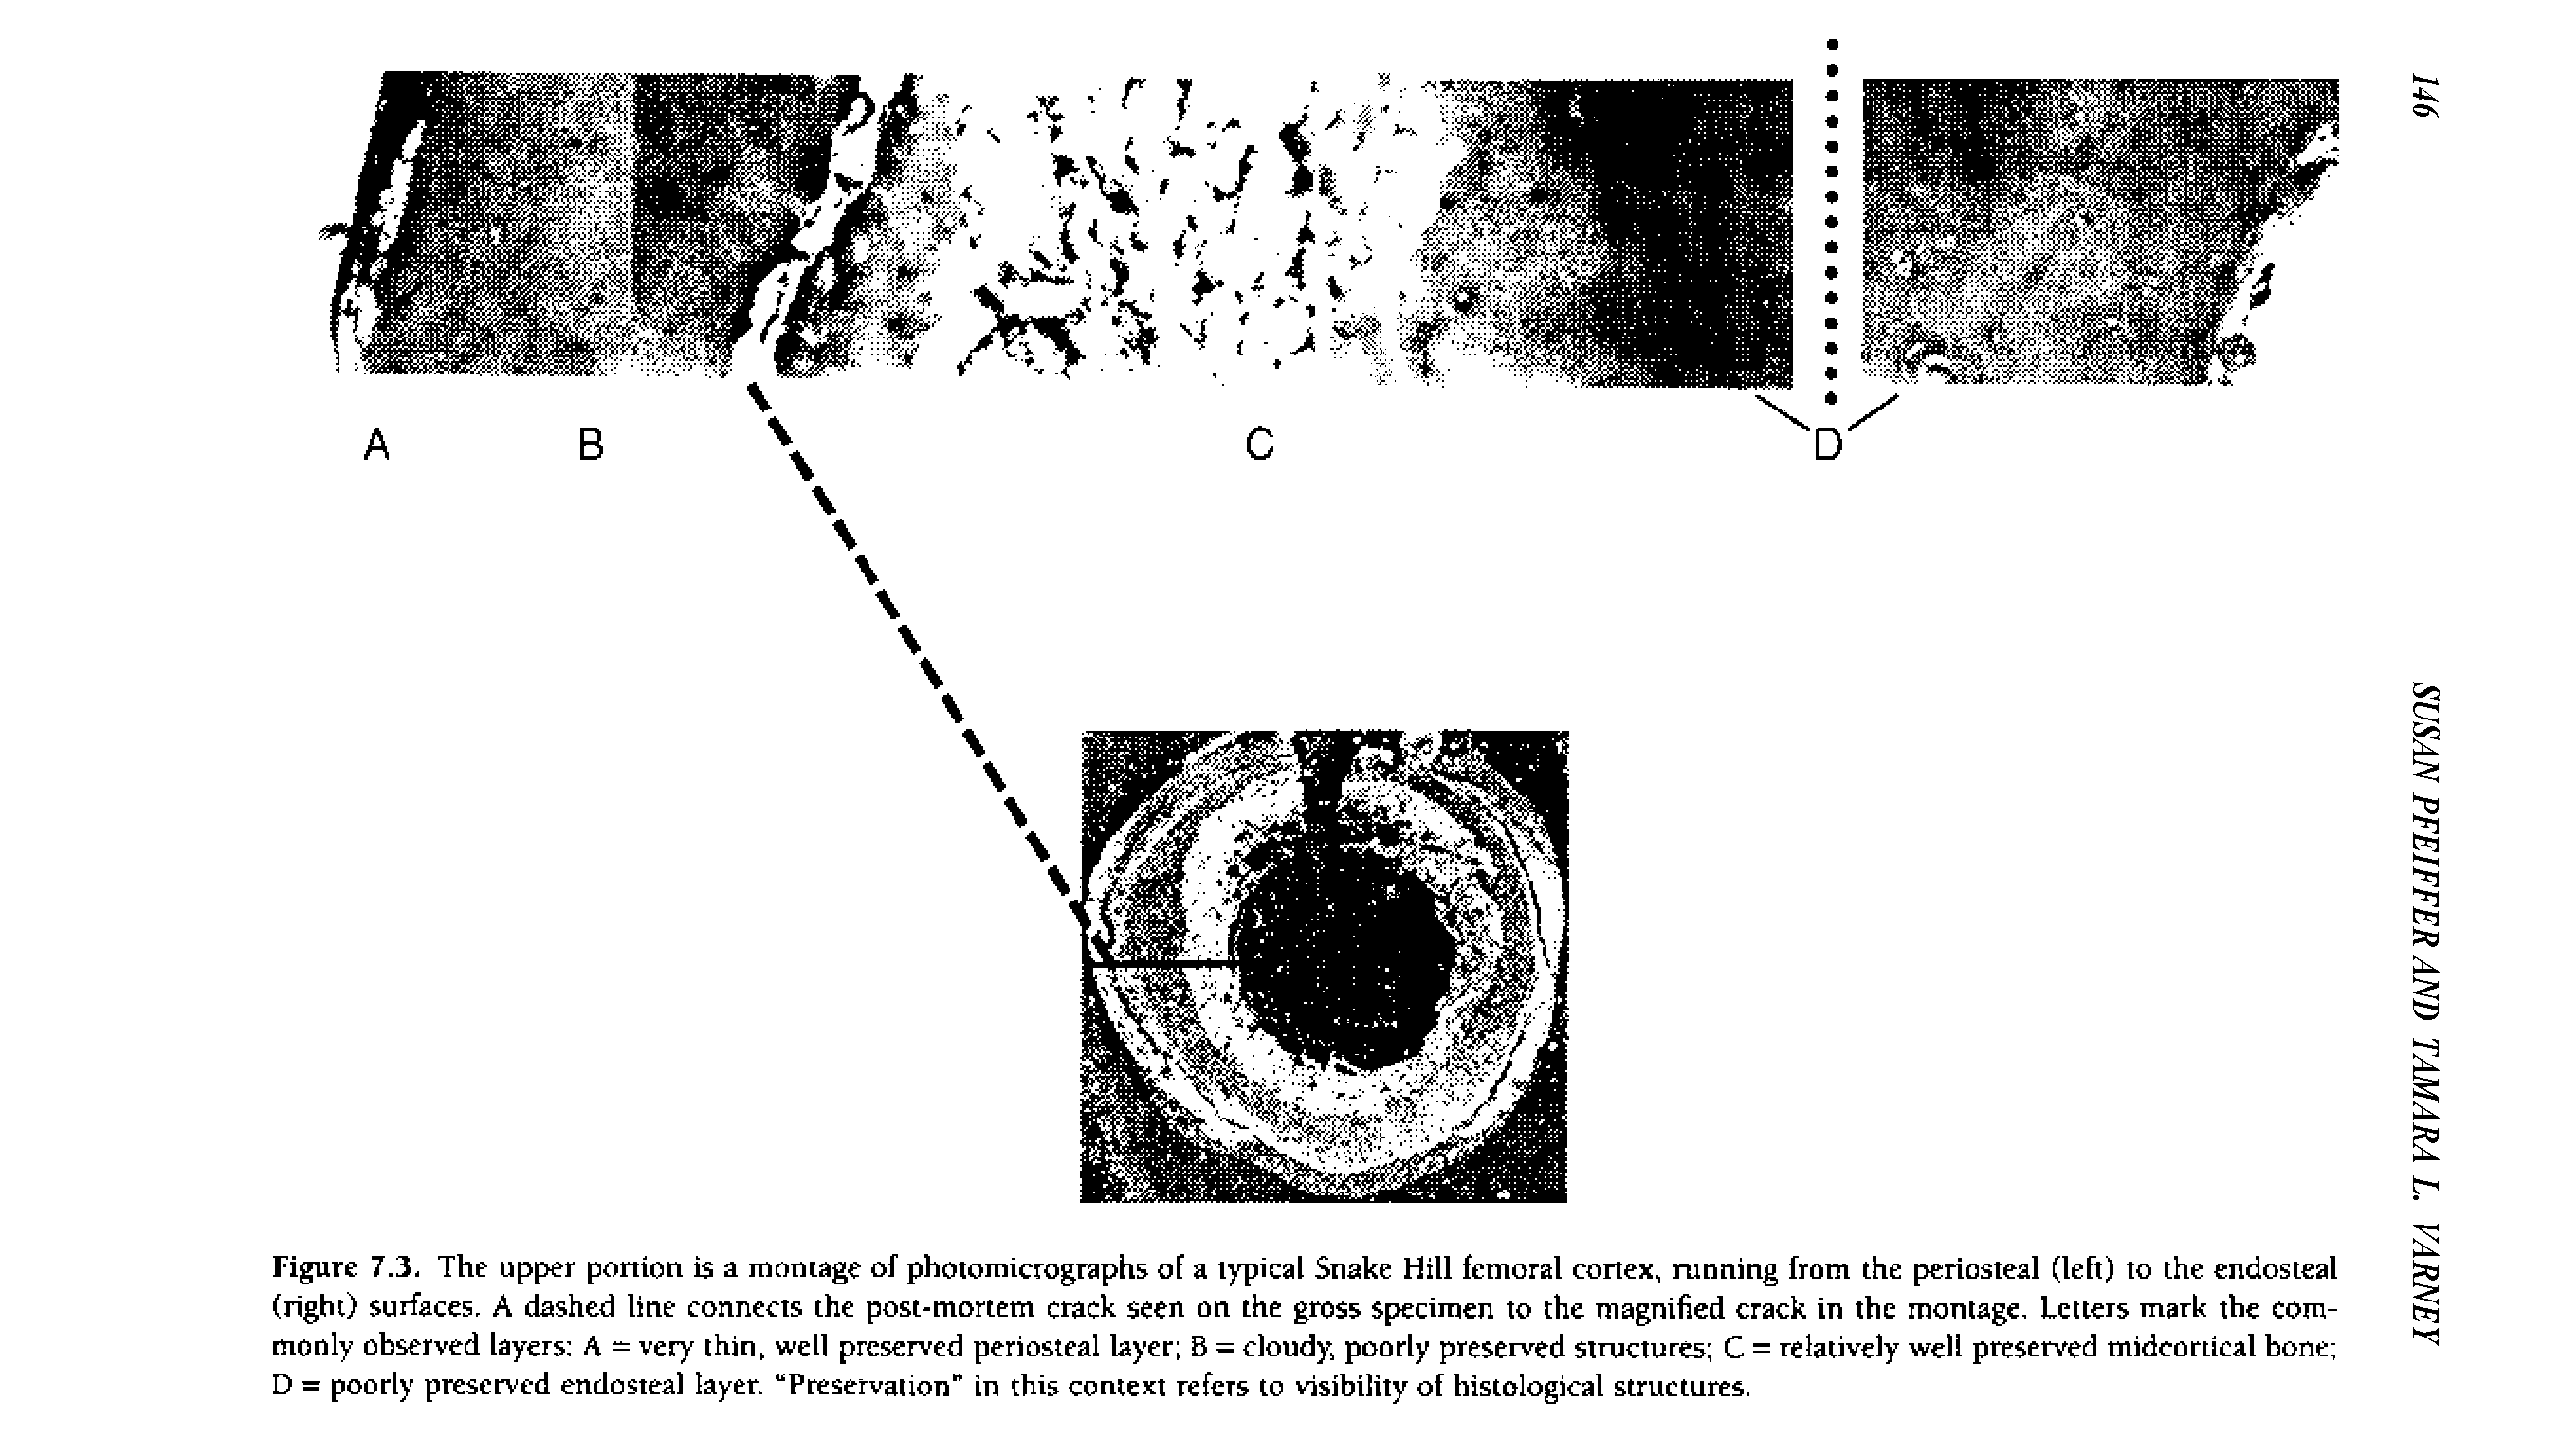 Figure 7.3. The upper ponion is a montage of photomicrographs of a typical Snake Hill femoral cortex, running from the periosteal (left) to the endosteal (right) surfaces. A dashed line connects the post-mortem crack seen on the gross specimen to the magnified crack in the montage. Letters mark the commonly observed layers A = very thin, well preserved periosteal layer B = cloudy, poorly preserved structures C = relatively well preserved midcortical bone D = poorly preserved endosteal layer. Preservation" in this context refers to visibility of histological structures.